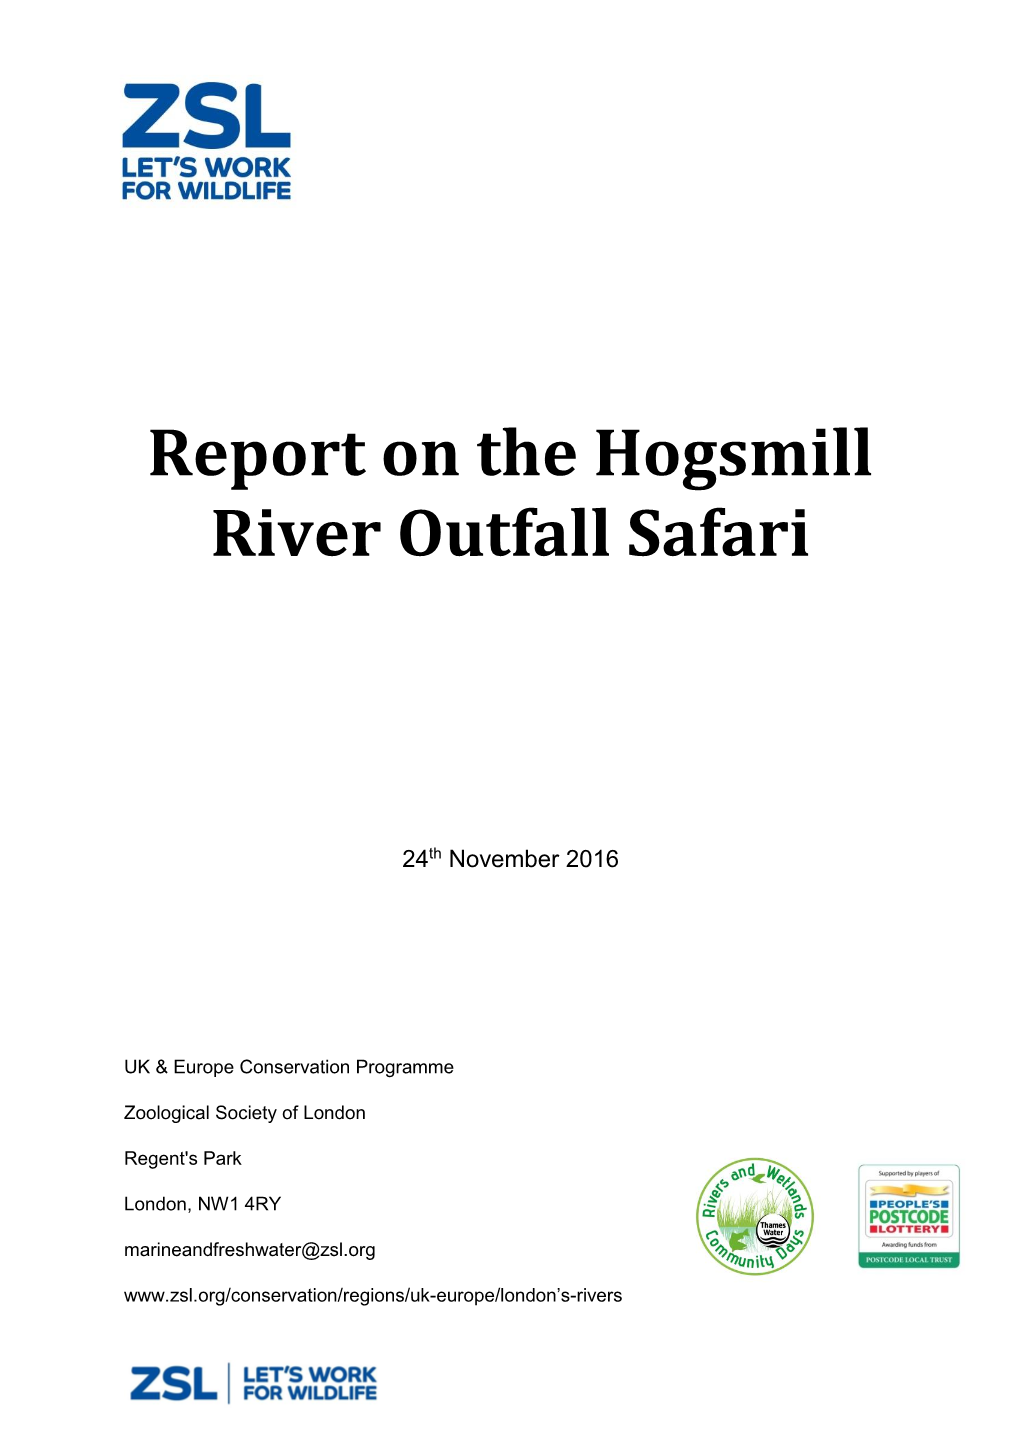 Report on the Hogsmill River Outfall Safari